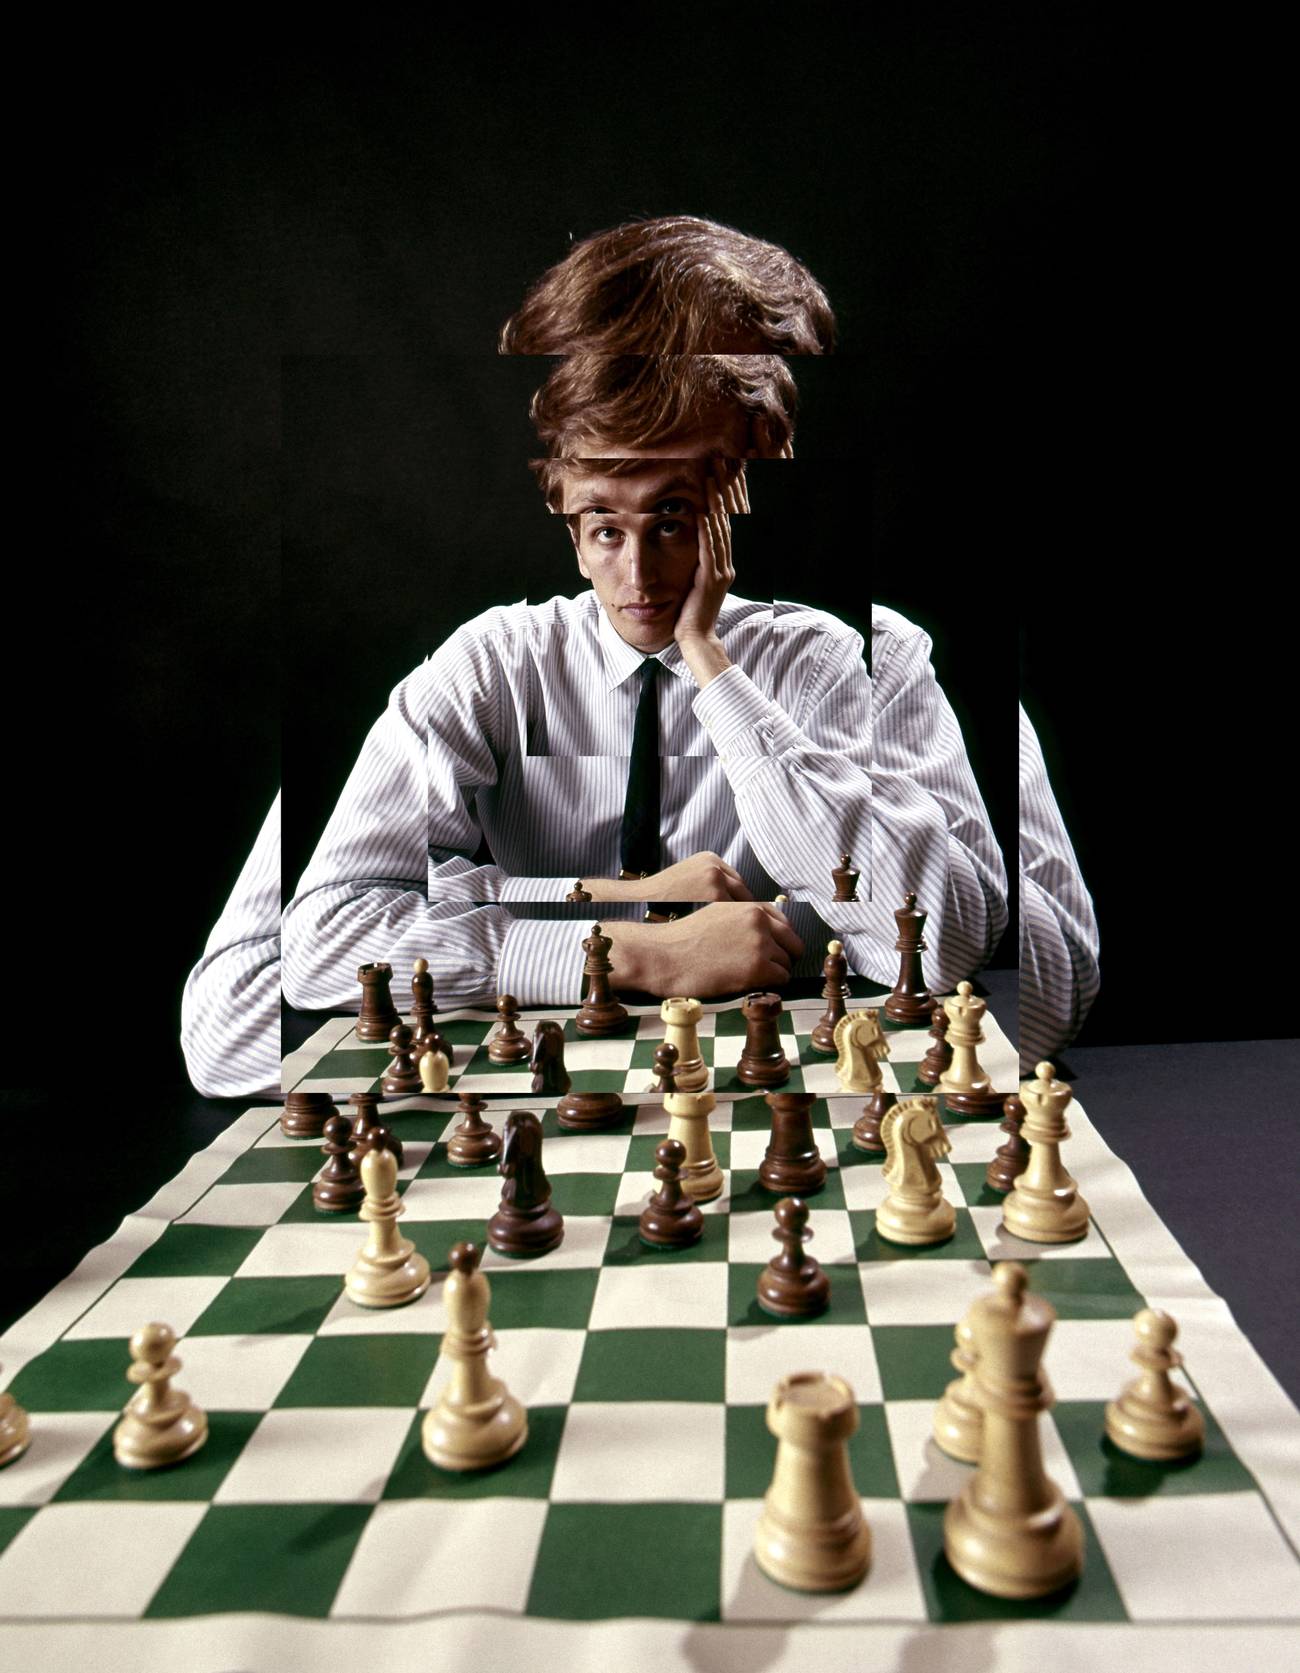 history - Did Fischer really have a 180 IQ? - Chess Stack Exchange